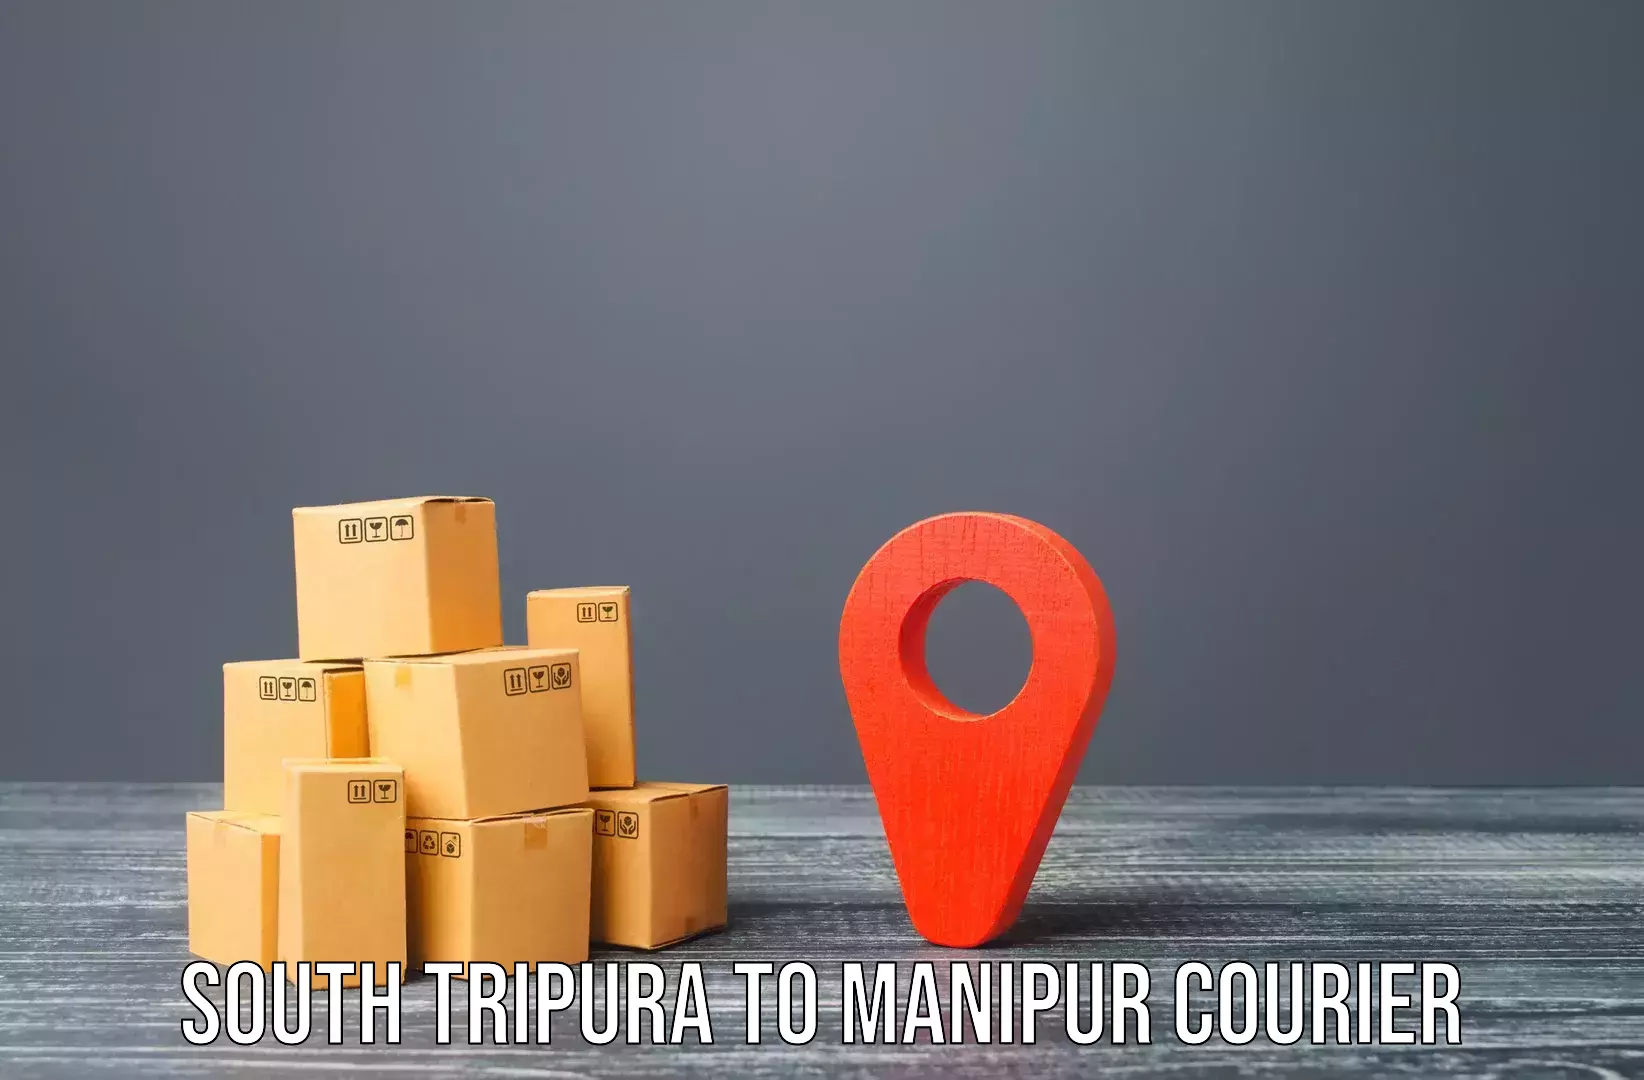 Quality relocation services South Tripura to Thoubal